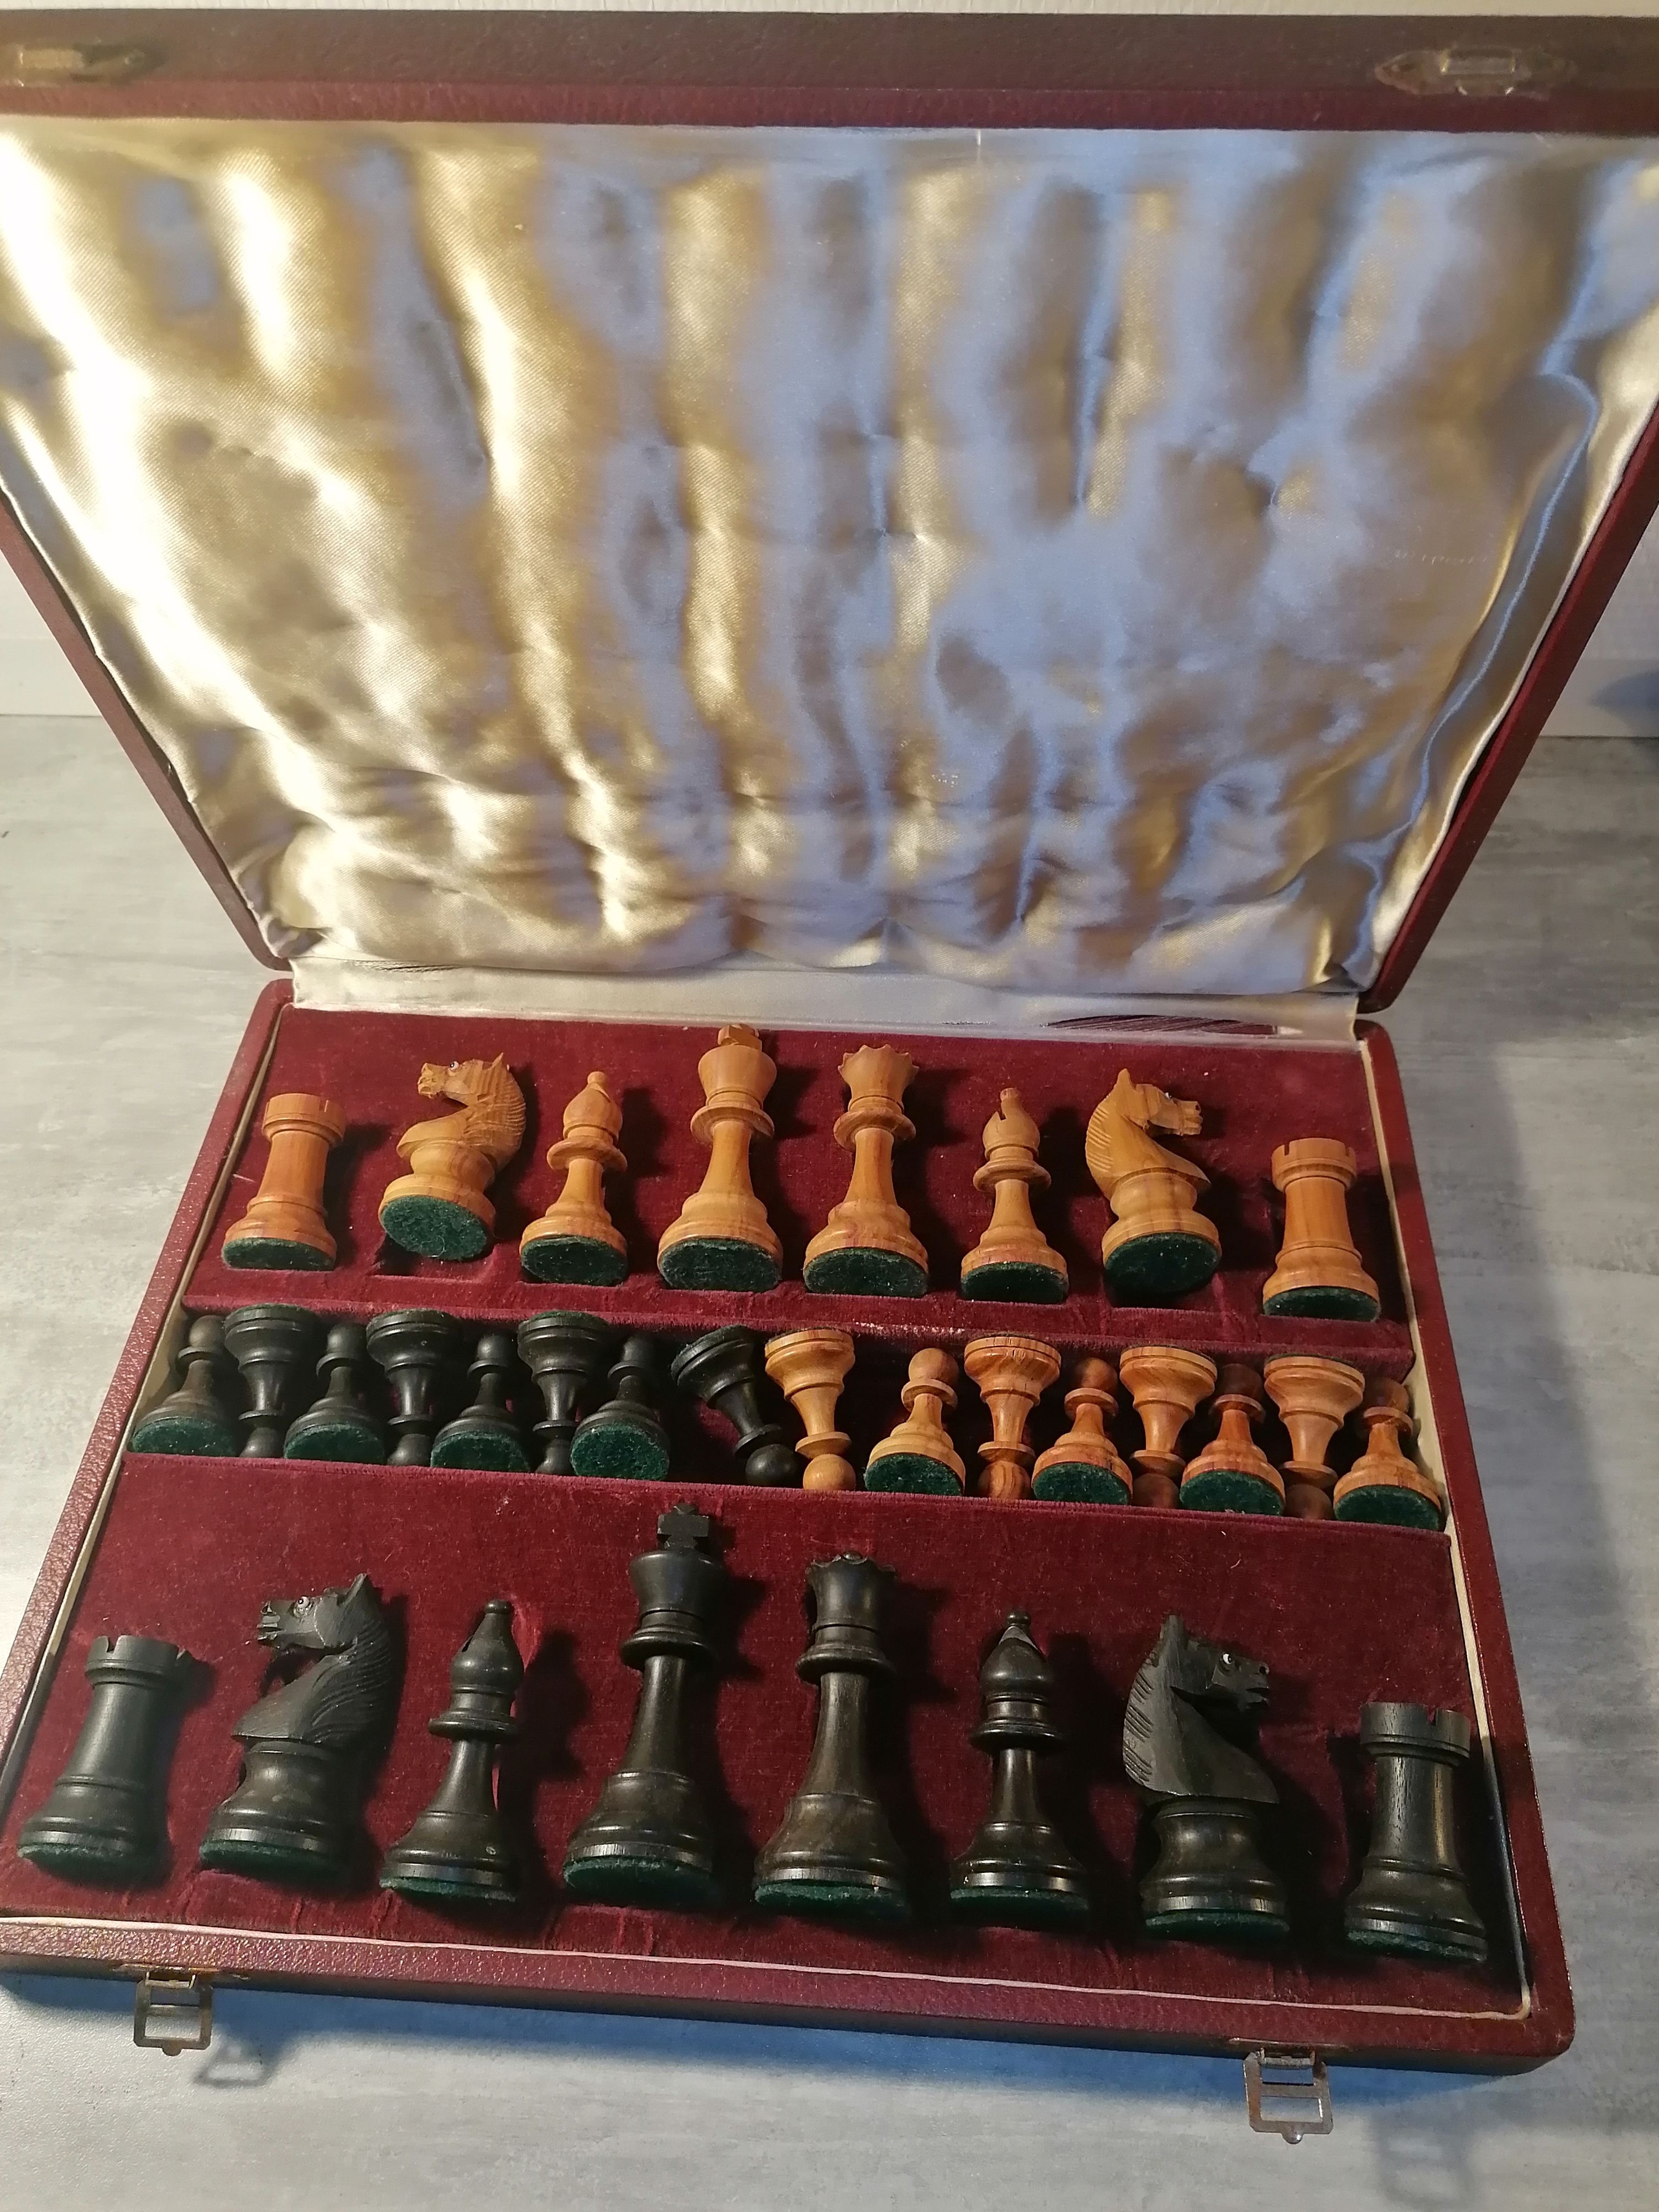 Obscure rule, or bug? - Chess Forums 